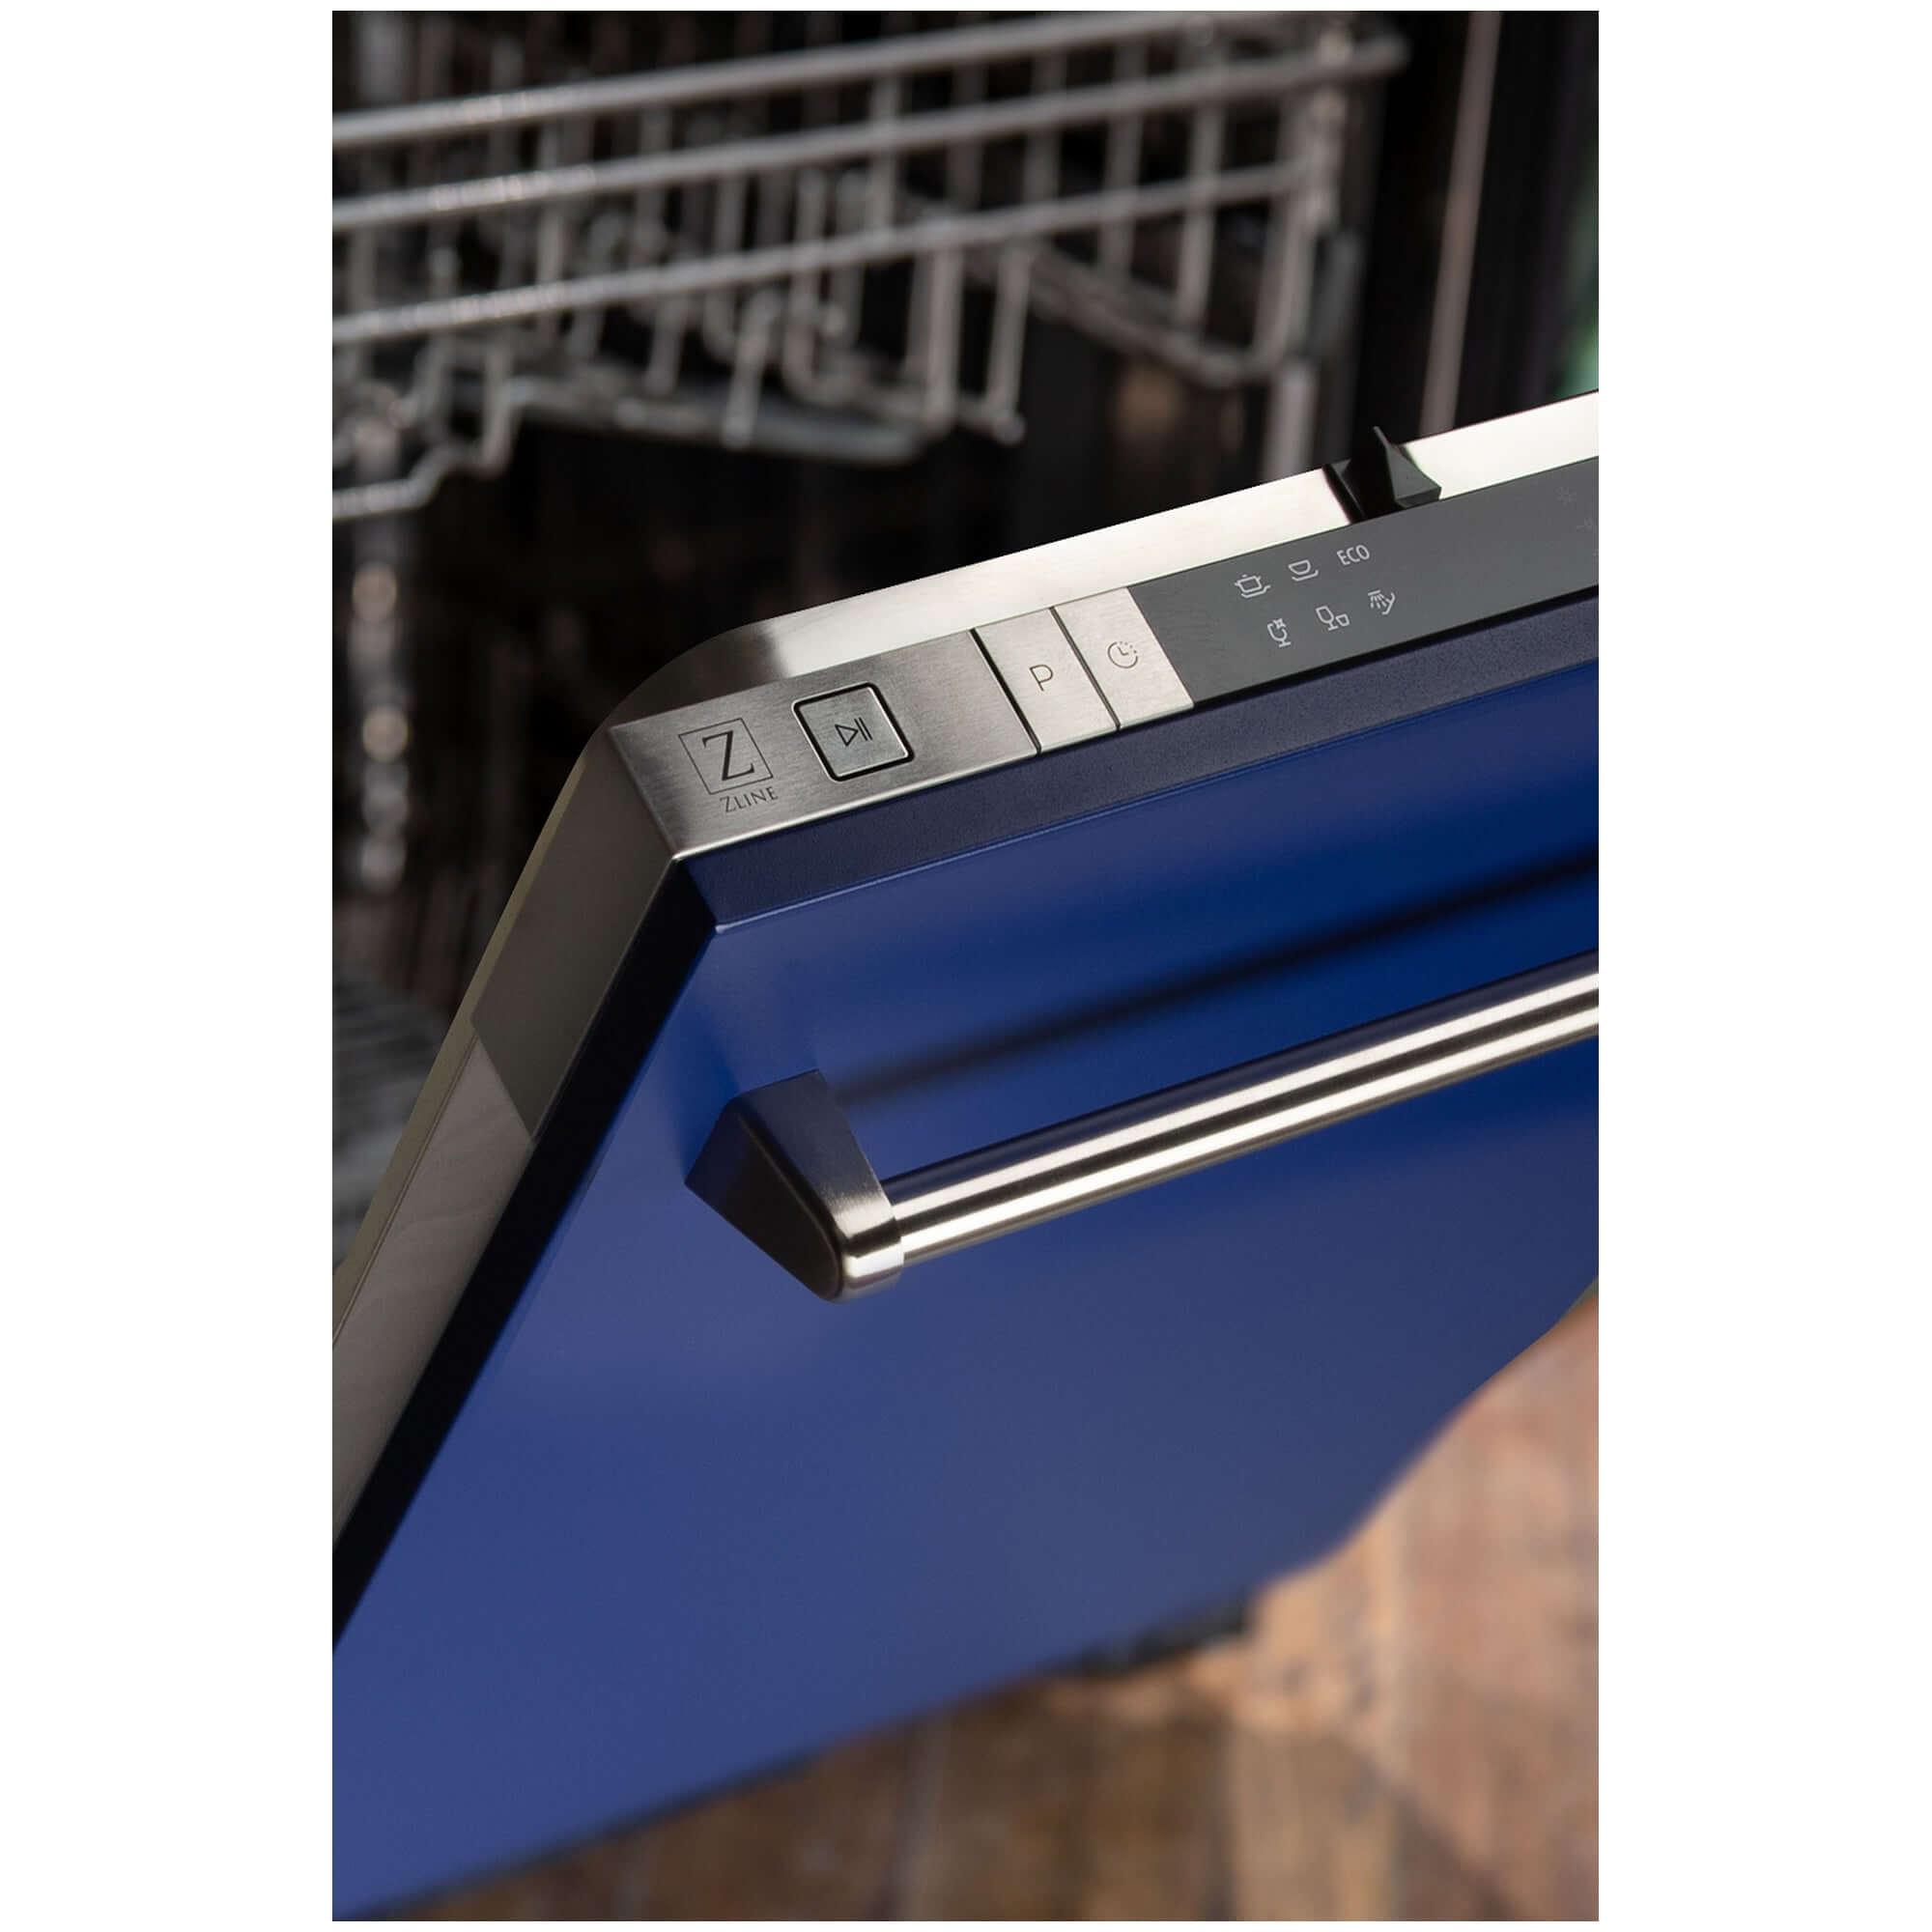 ZLINE 18 in. Compact Blue Matte Top Control Built-In Dishwasher with Stainless Steel Tub and Traditional Style Handle, 52dBa (DW-BM-18) built-in to cabinets in a luxury kitchen.